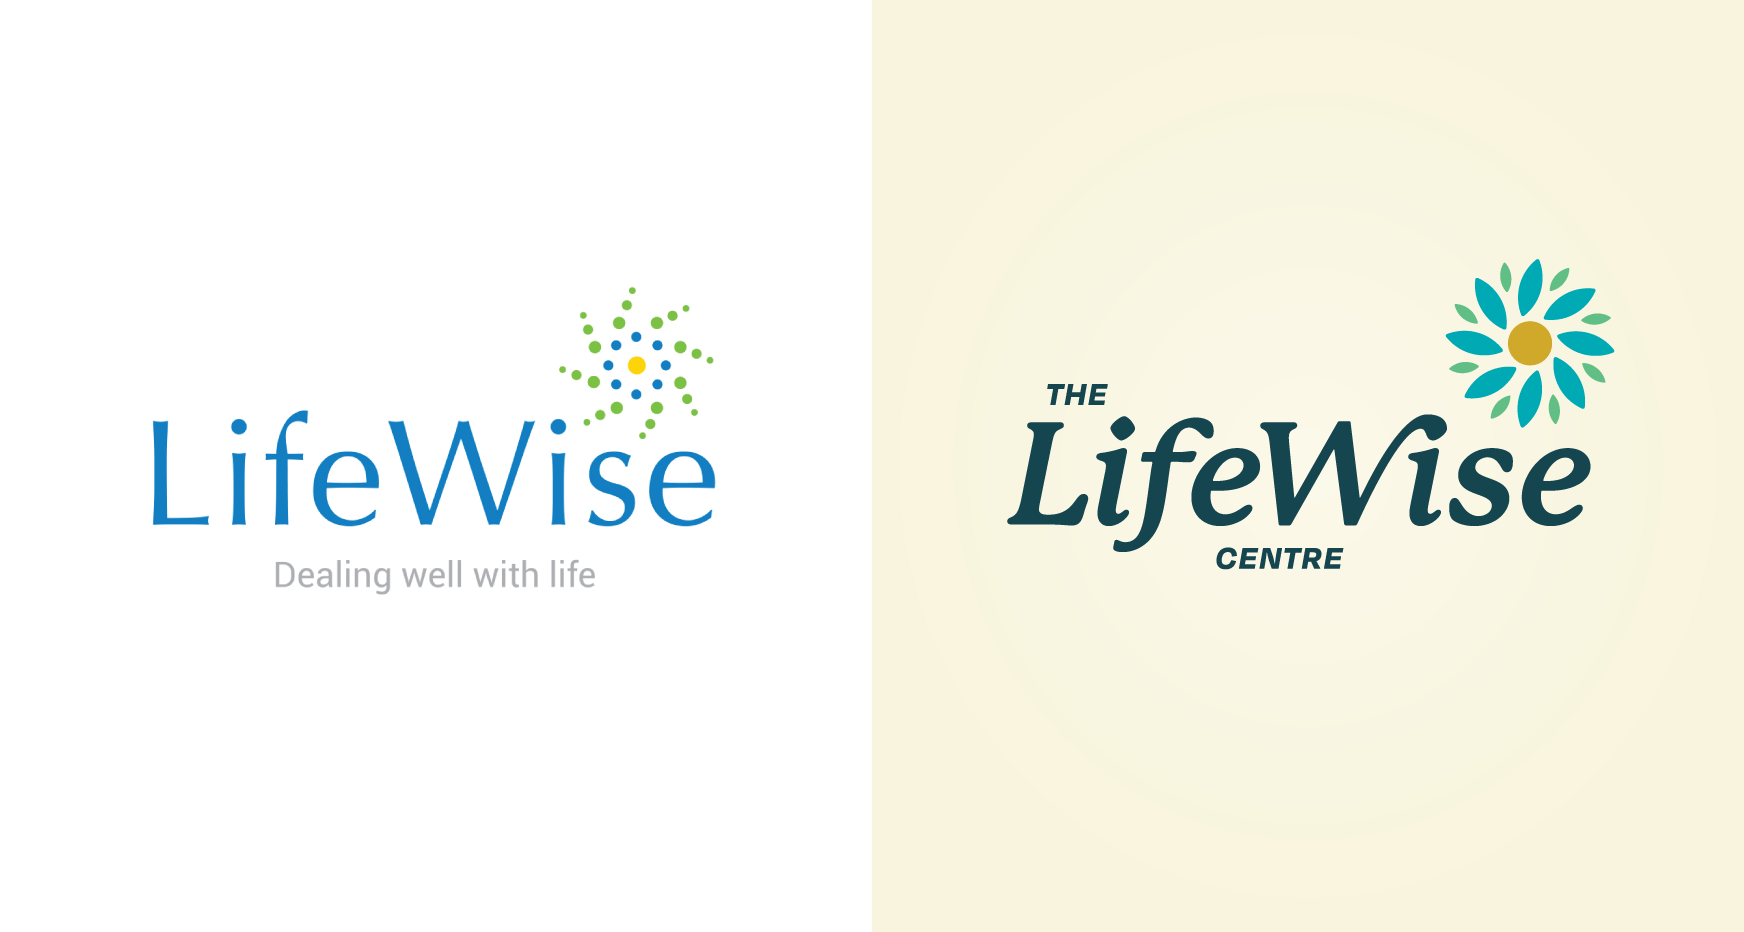 BDC_Site_CaseStudy_LIFEWISE_OLDvNEW_MOBILE